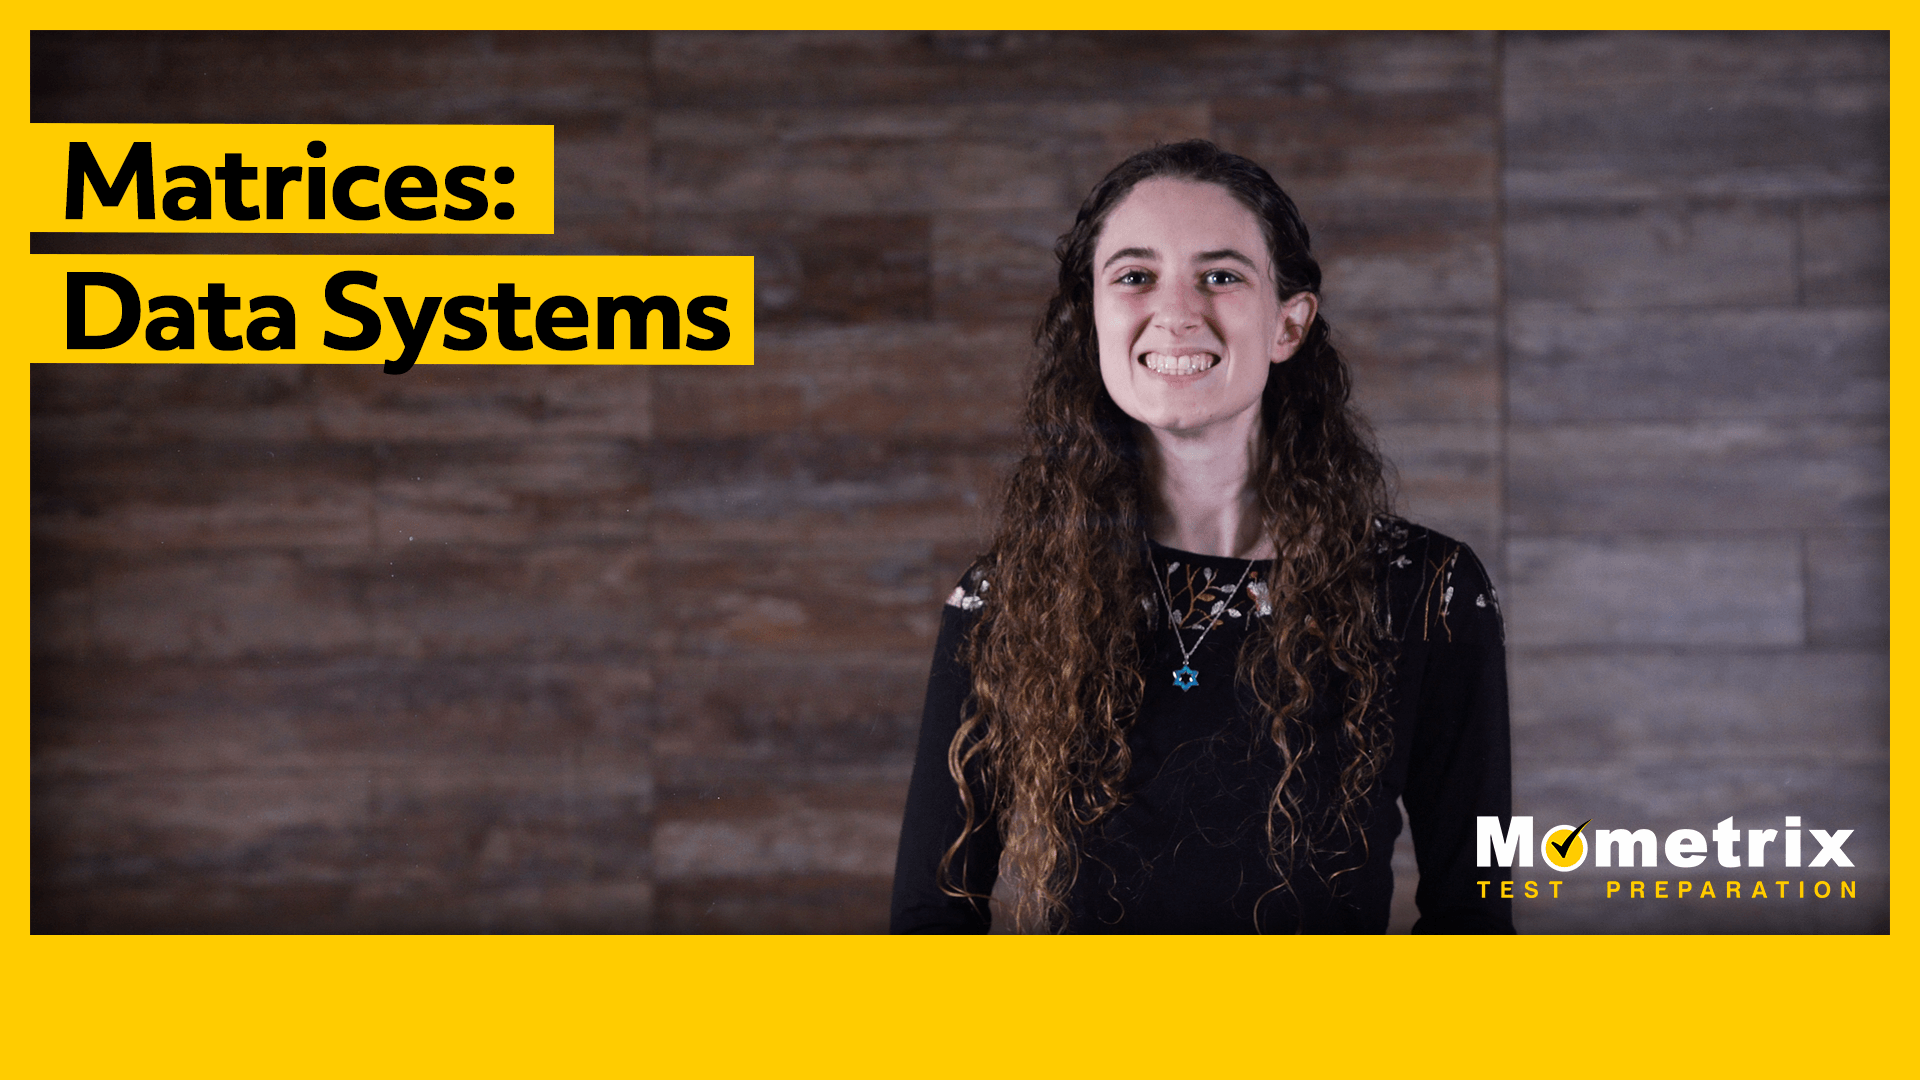 A person with long, curly hair stands and smiles in front of a wooden background. Text on the image reads "Matrices: Data Systems" and "Mometrix Test Preparation.